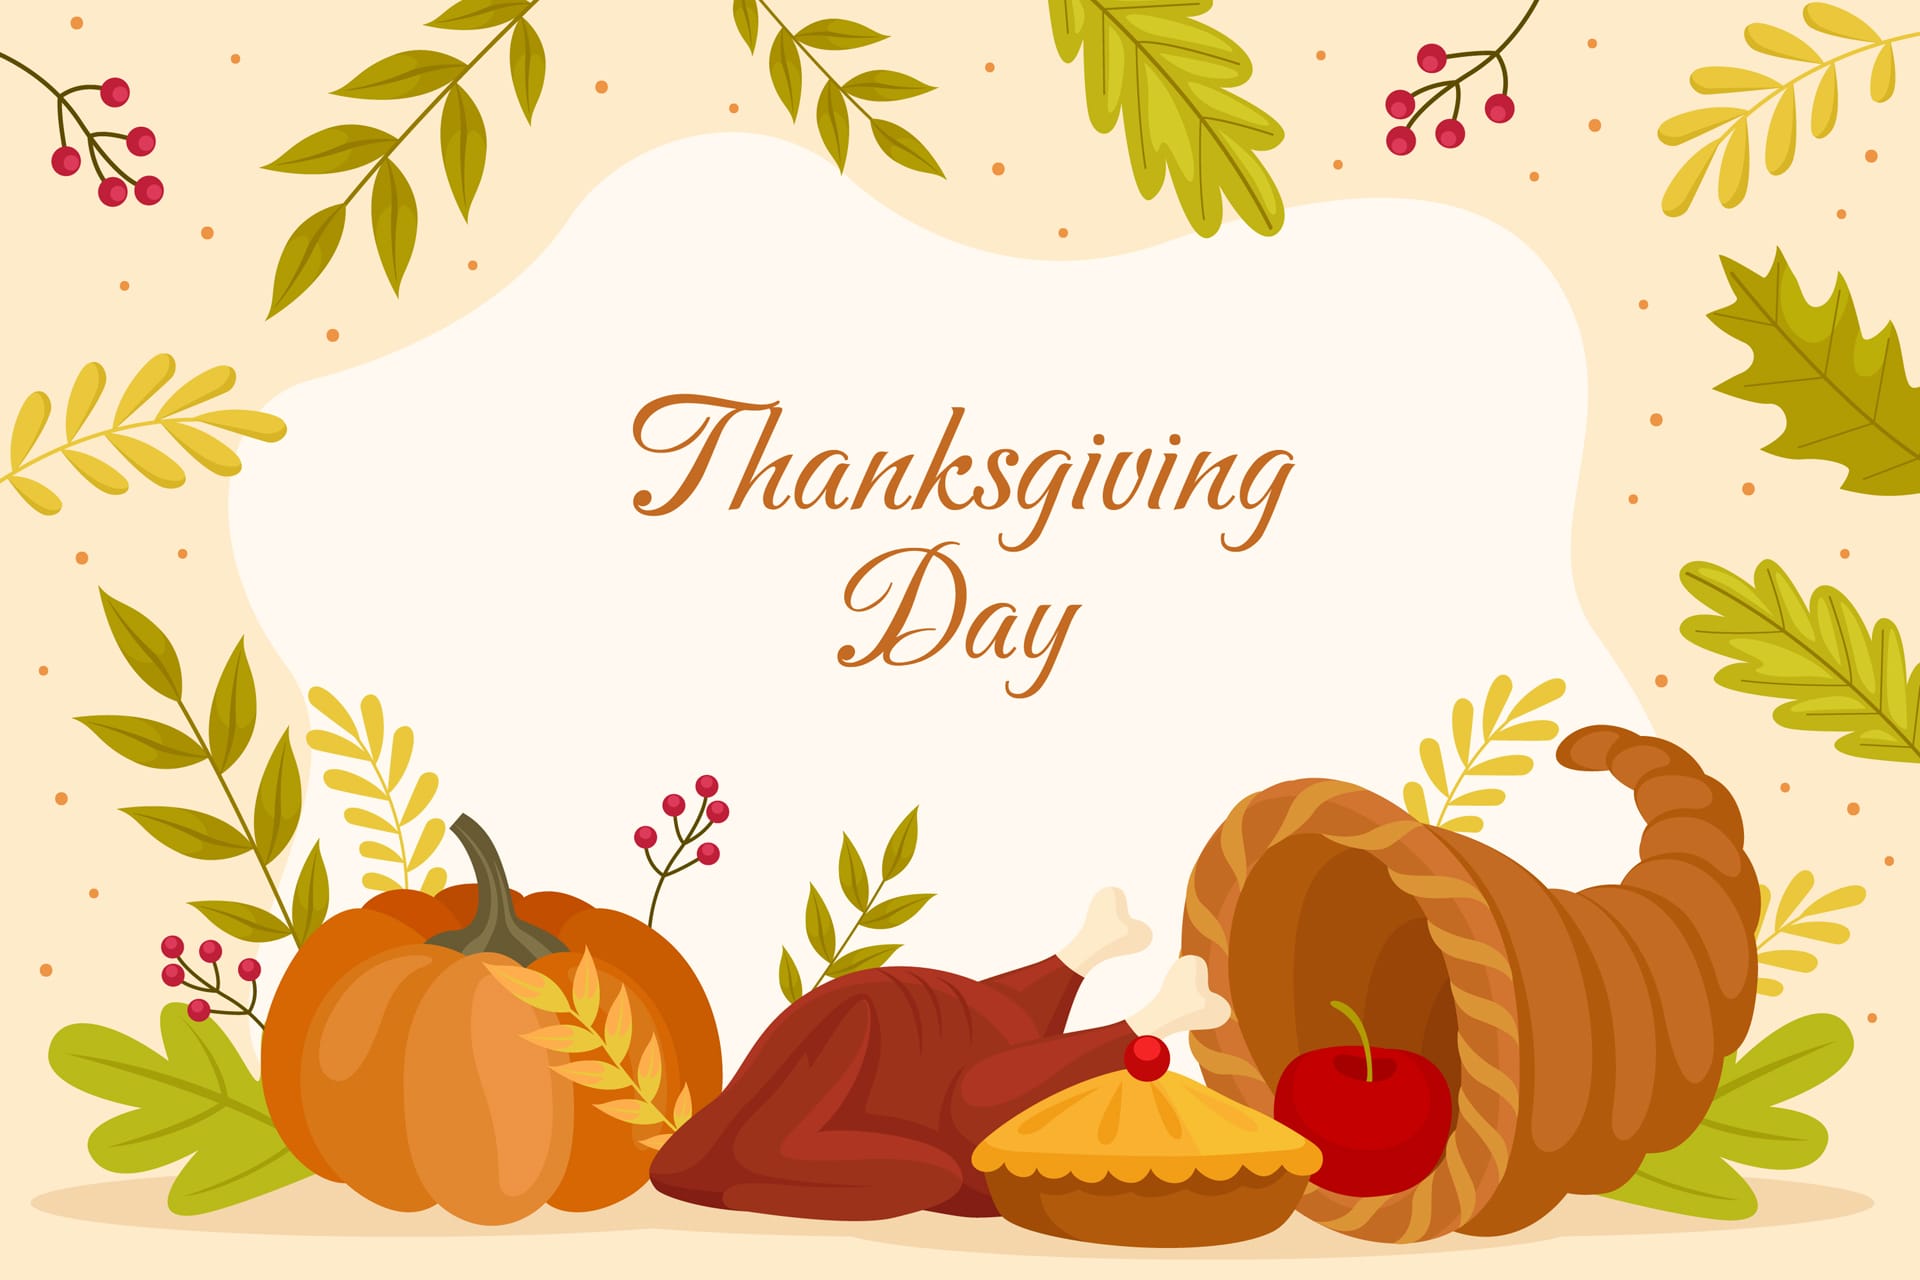 Happy thanksgiving images flat thanksgiving celebration background picture